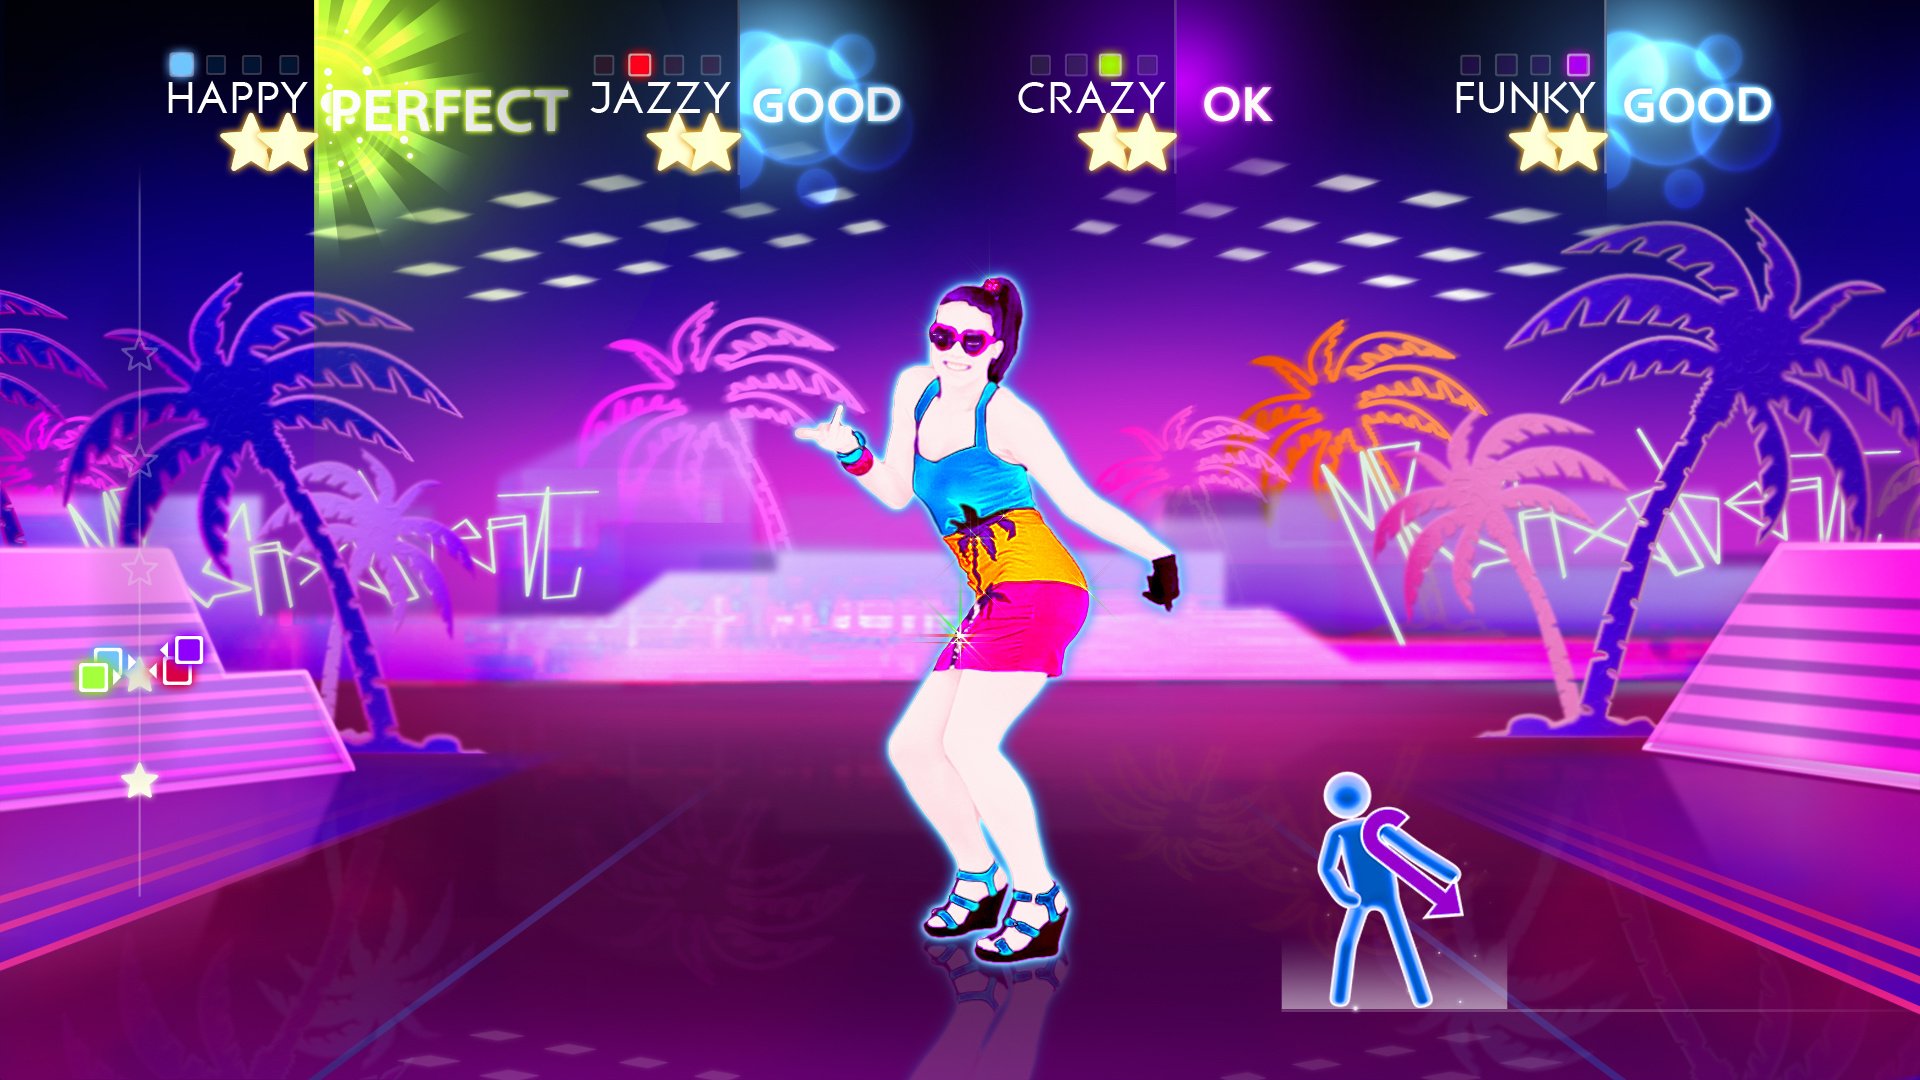 free download just dance four